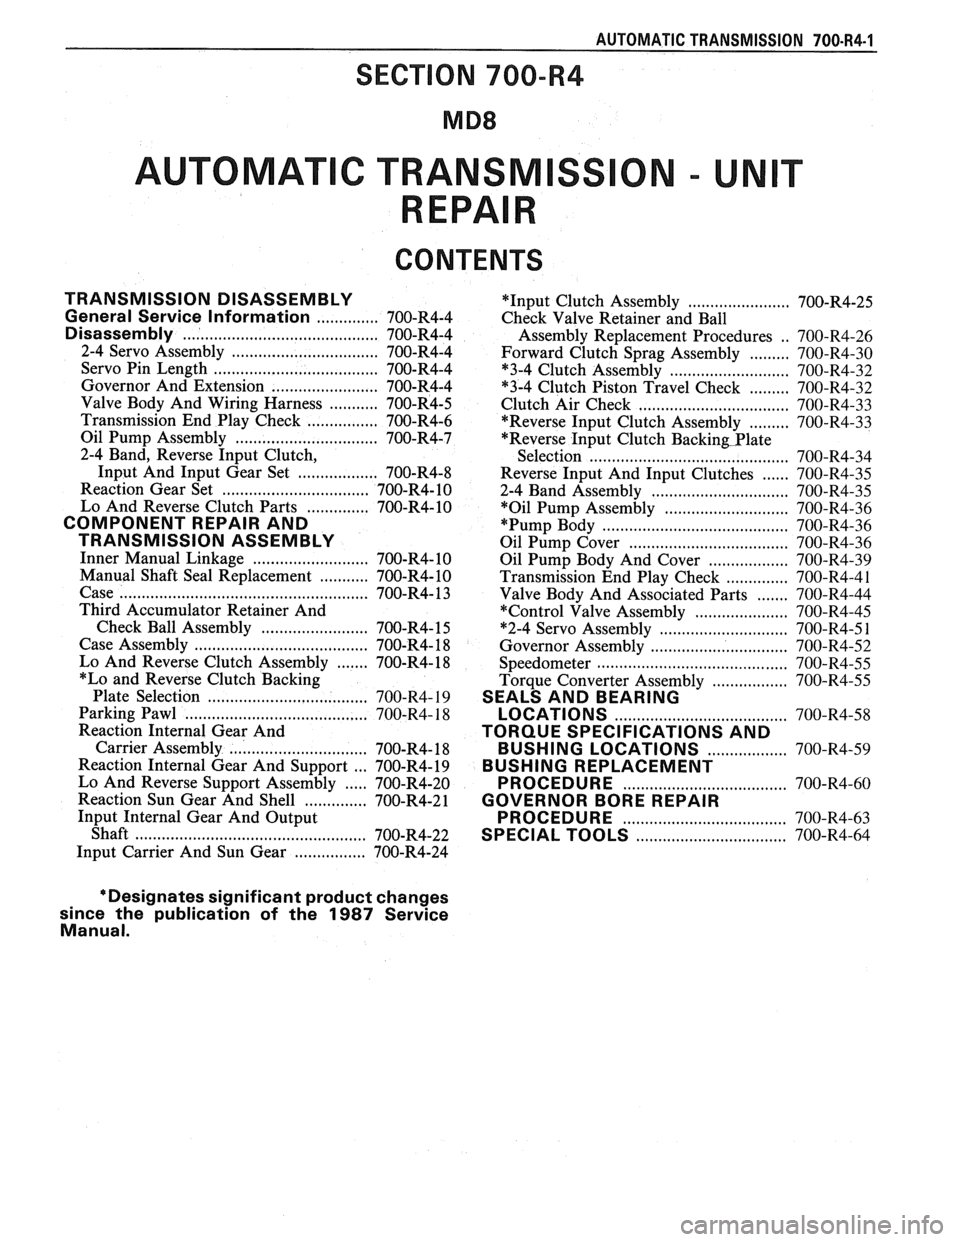 PONTIAC FIERO 1988  Service Owners Guide 
AUTOMATIC  TRANSMISSION 700-R4-1 
AUTOMAT C TRANSM 
CONTENTS 
TRANSMISSION DISASSEMBLY 
.............. General Service Information 700-R4-4 
........................................... Disassembly 70